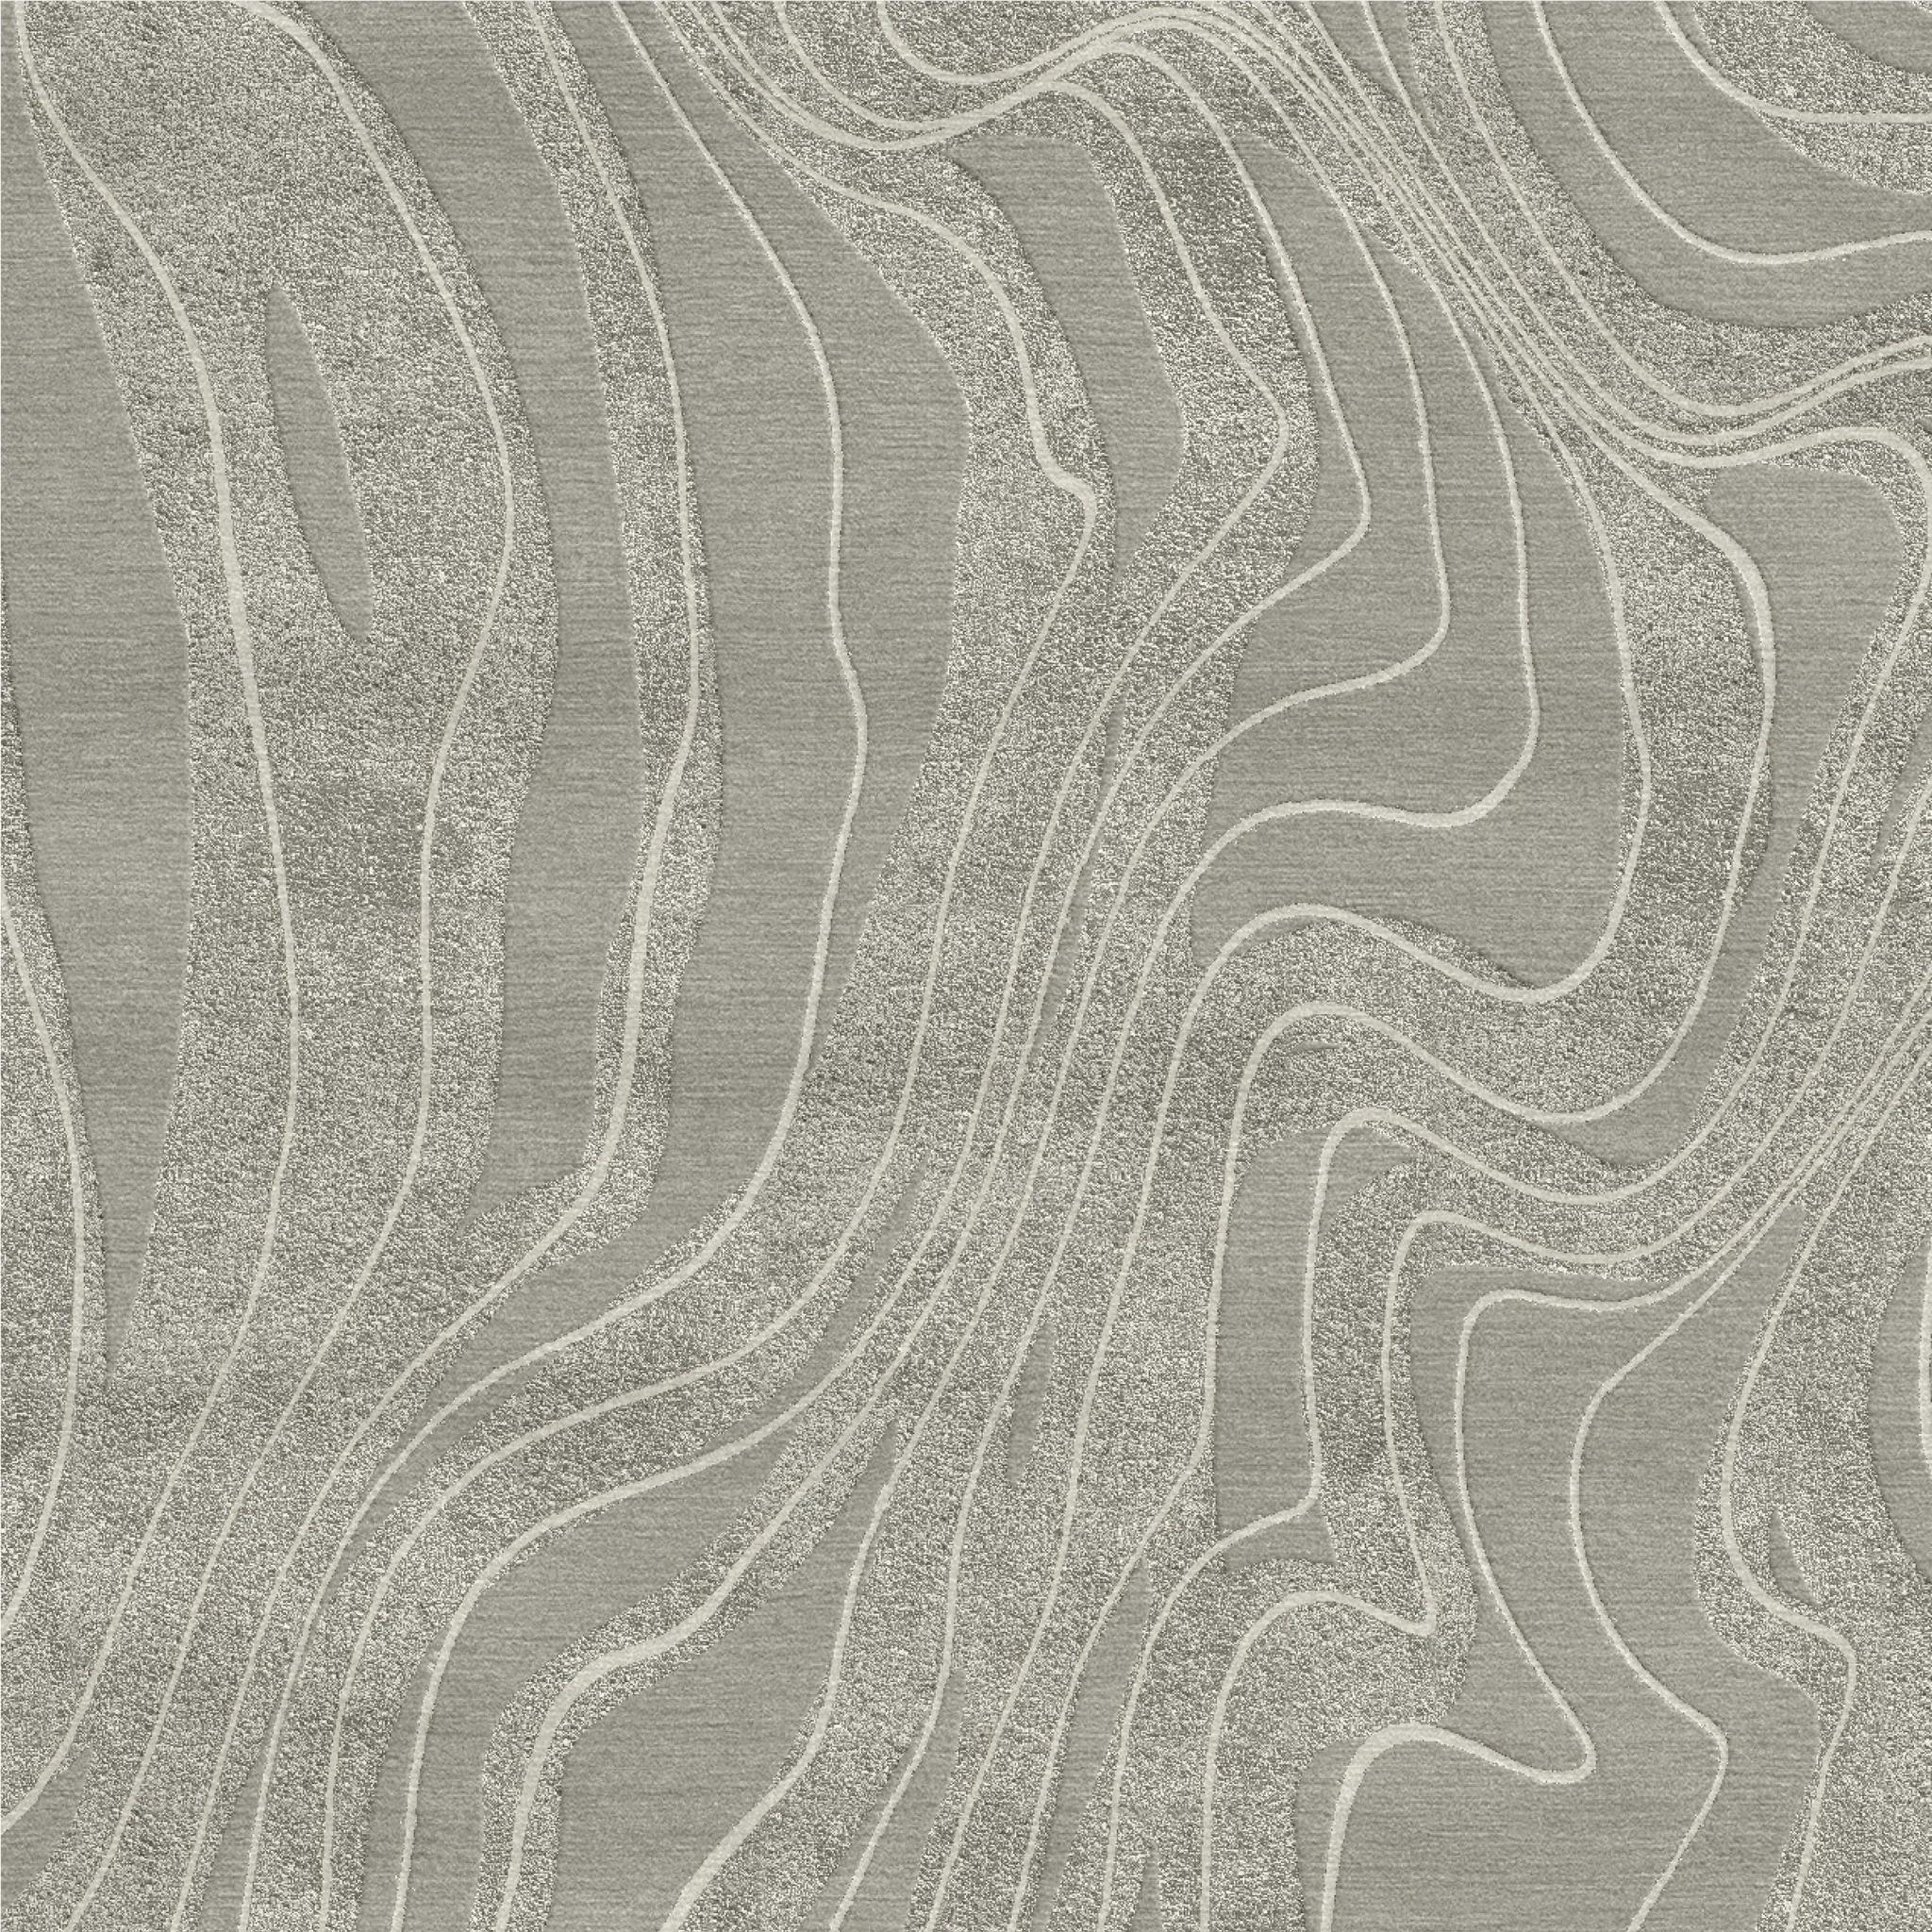 Extraordinarily plush, this hand-tufted rug fits seamlessly in any interior with its neutral palette and abstract motif of ivory sinuous lines over a dove gray background. Handwoven in India using New Zealand wool and bamboo silk, the technique